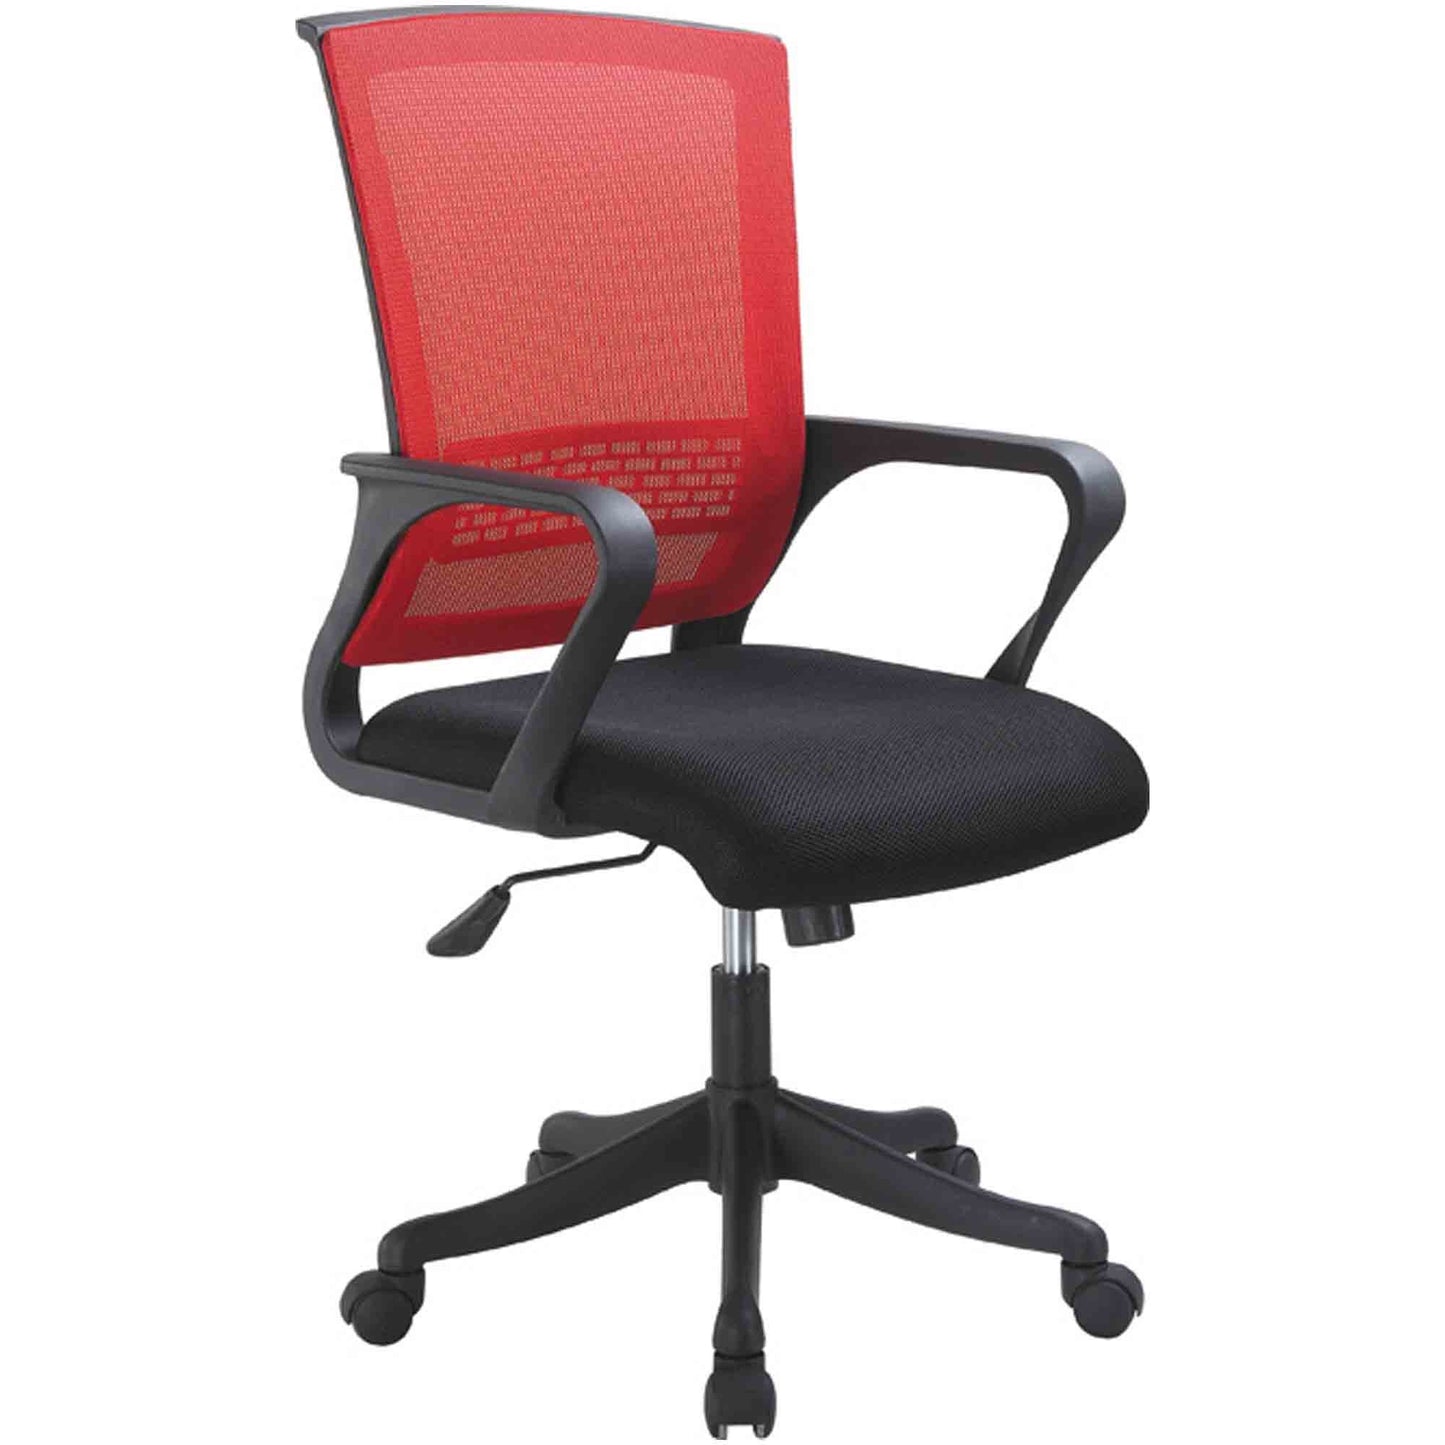 Office Chair - mch0024